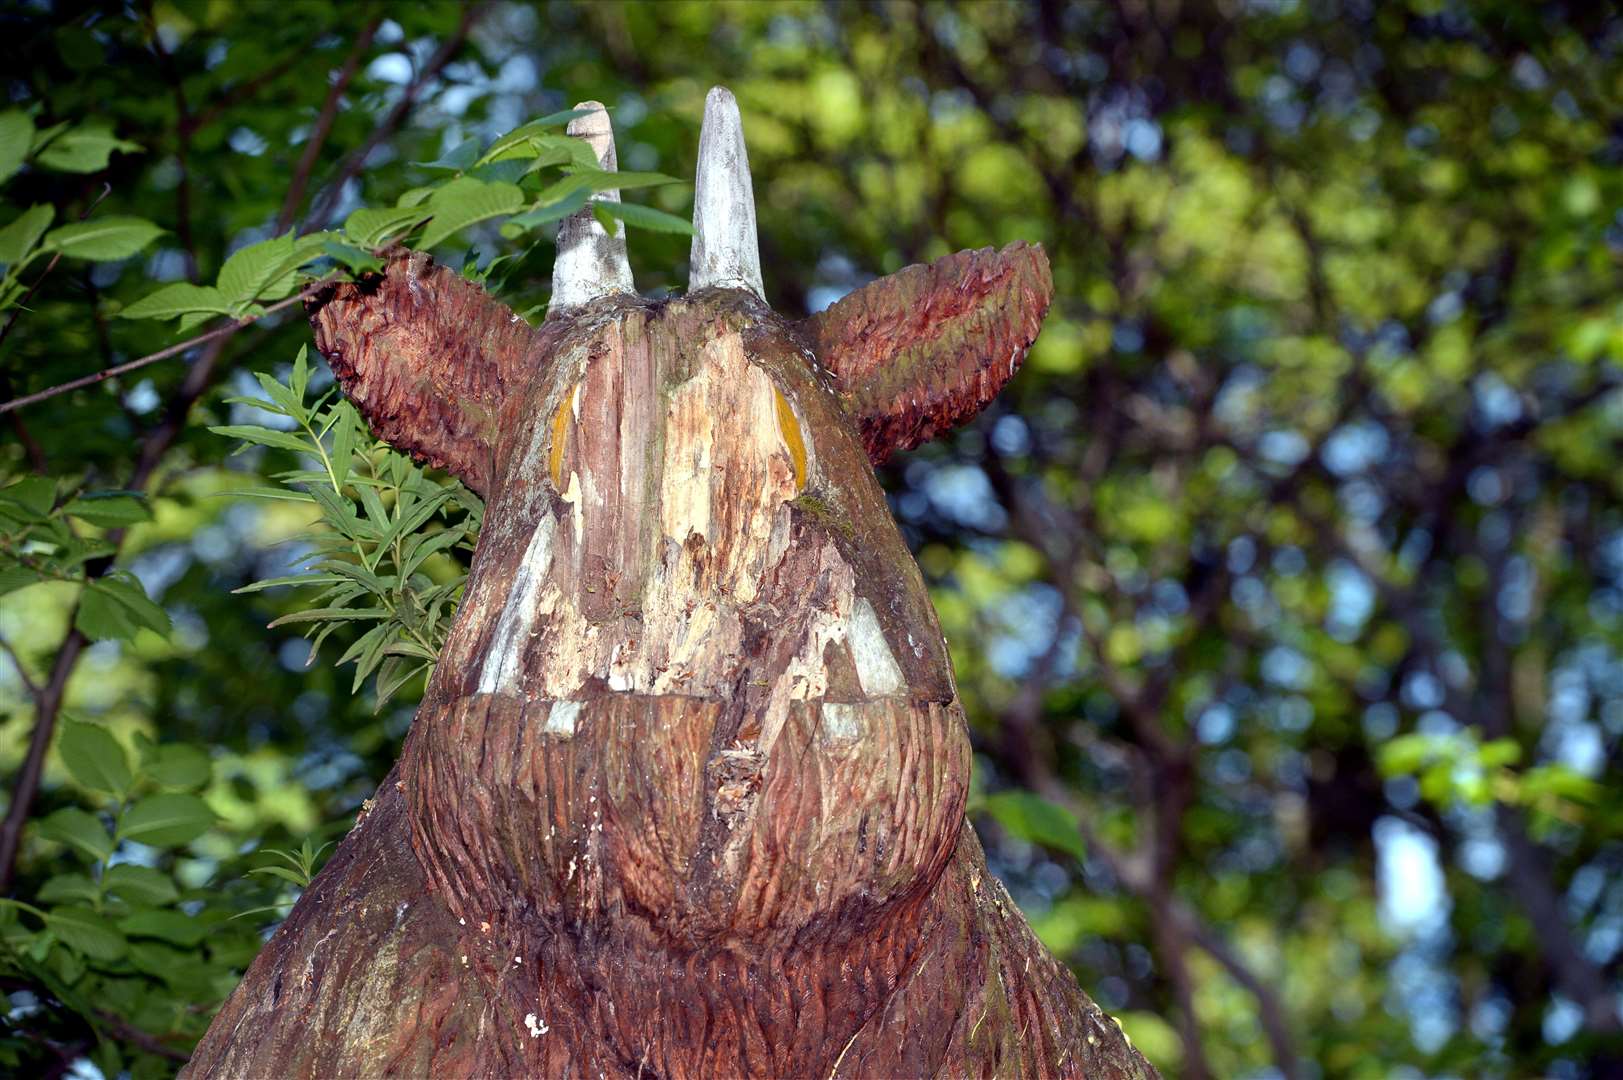 The walk's Gruffalo carving was previously vandalised.